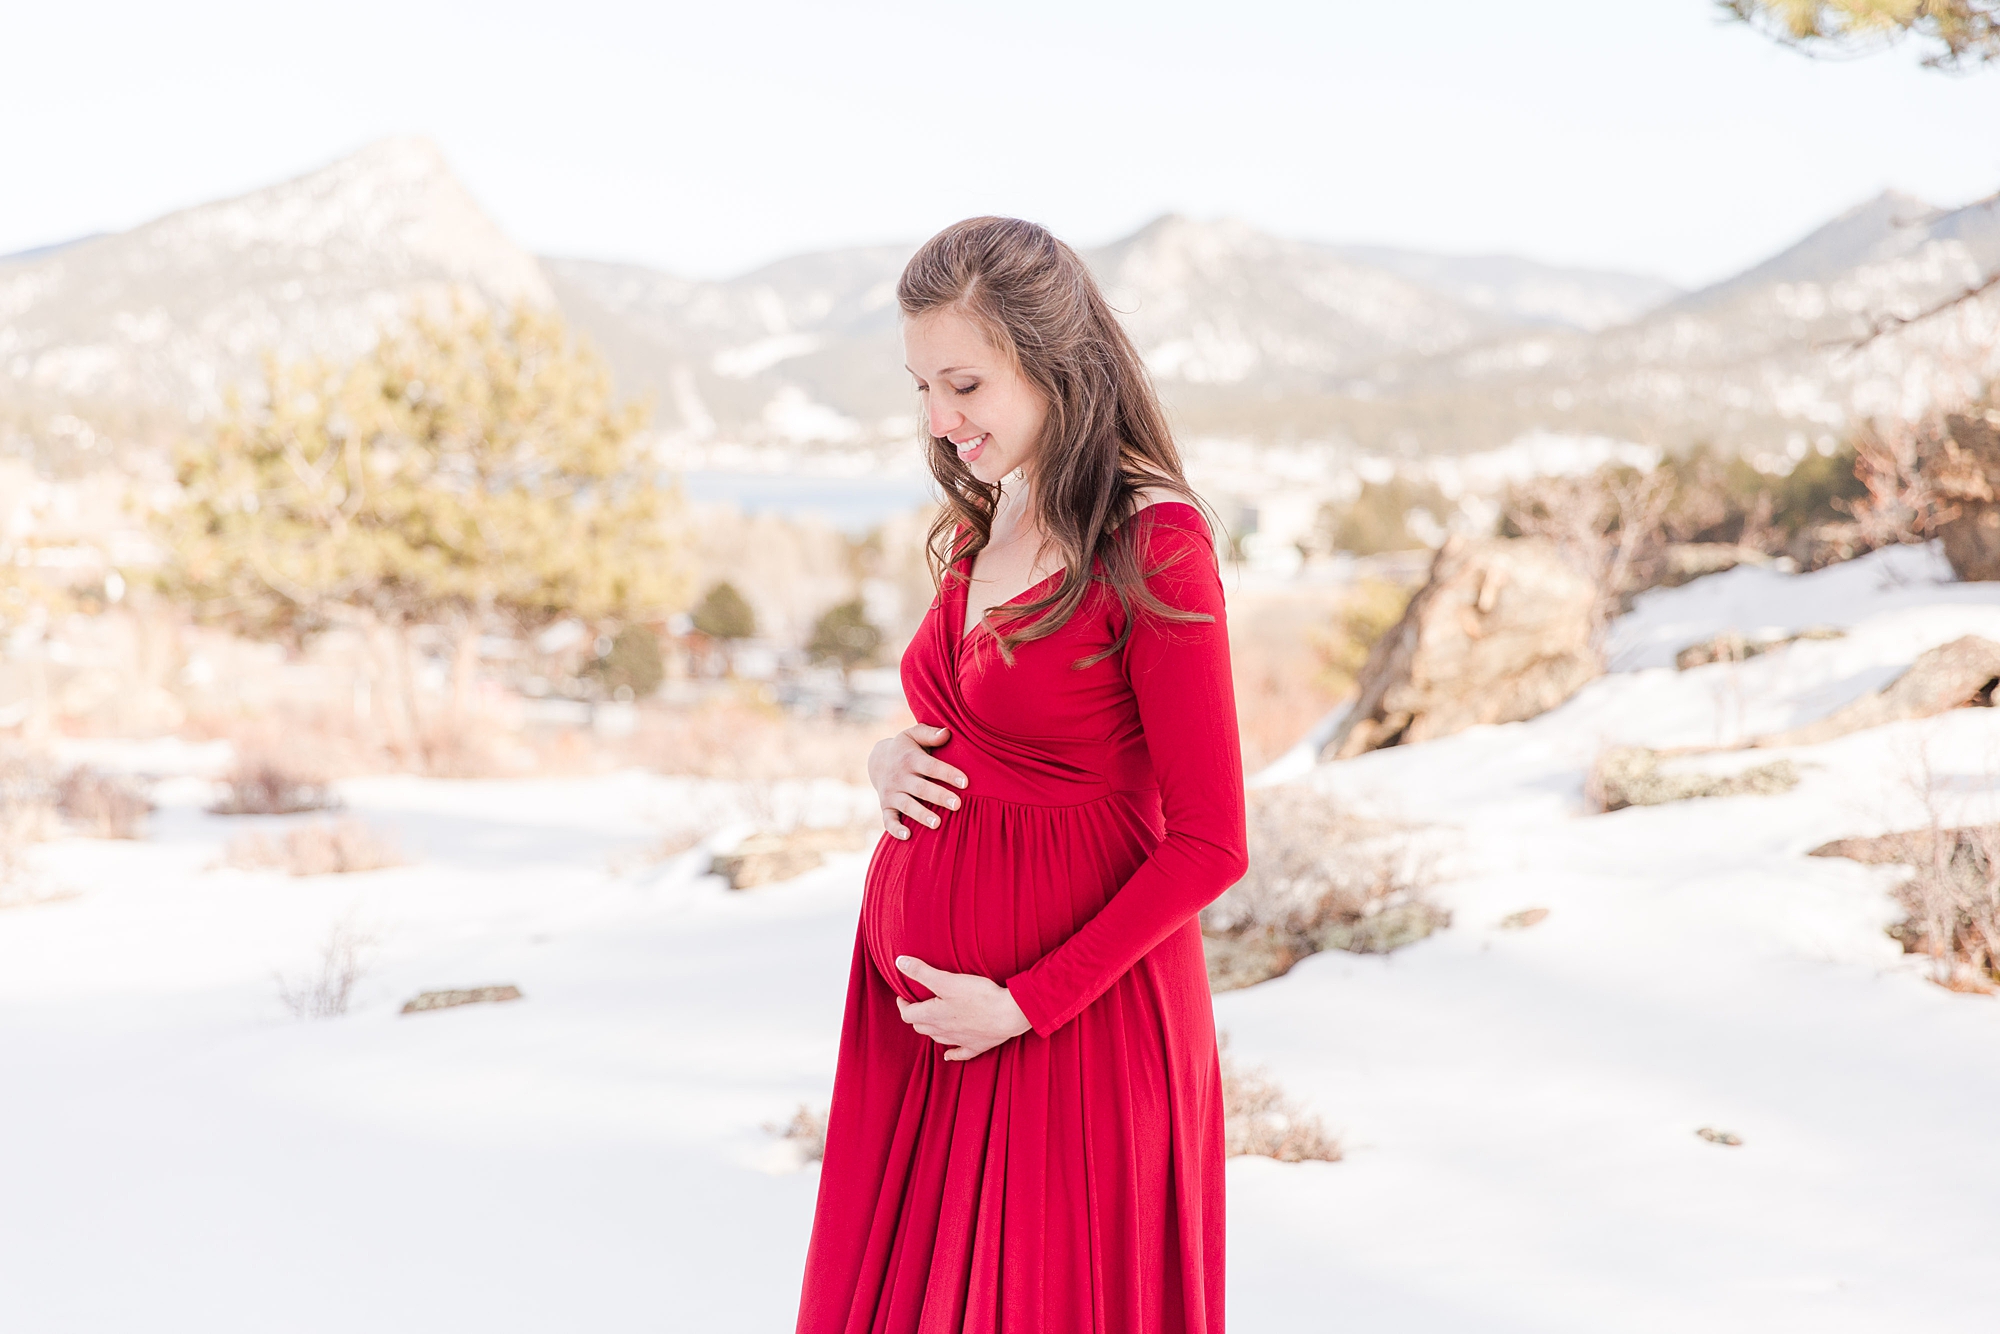 Knoll Willows Open Space maternity session at one of Northern Colorado Top 10 Locations for Photo Sessions